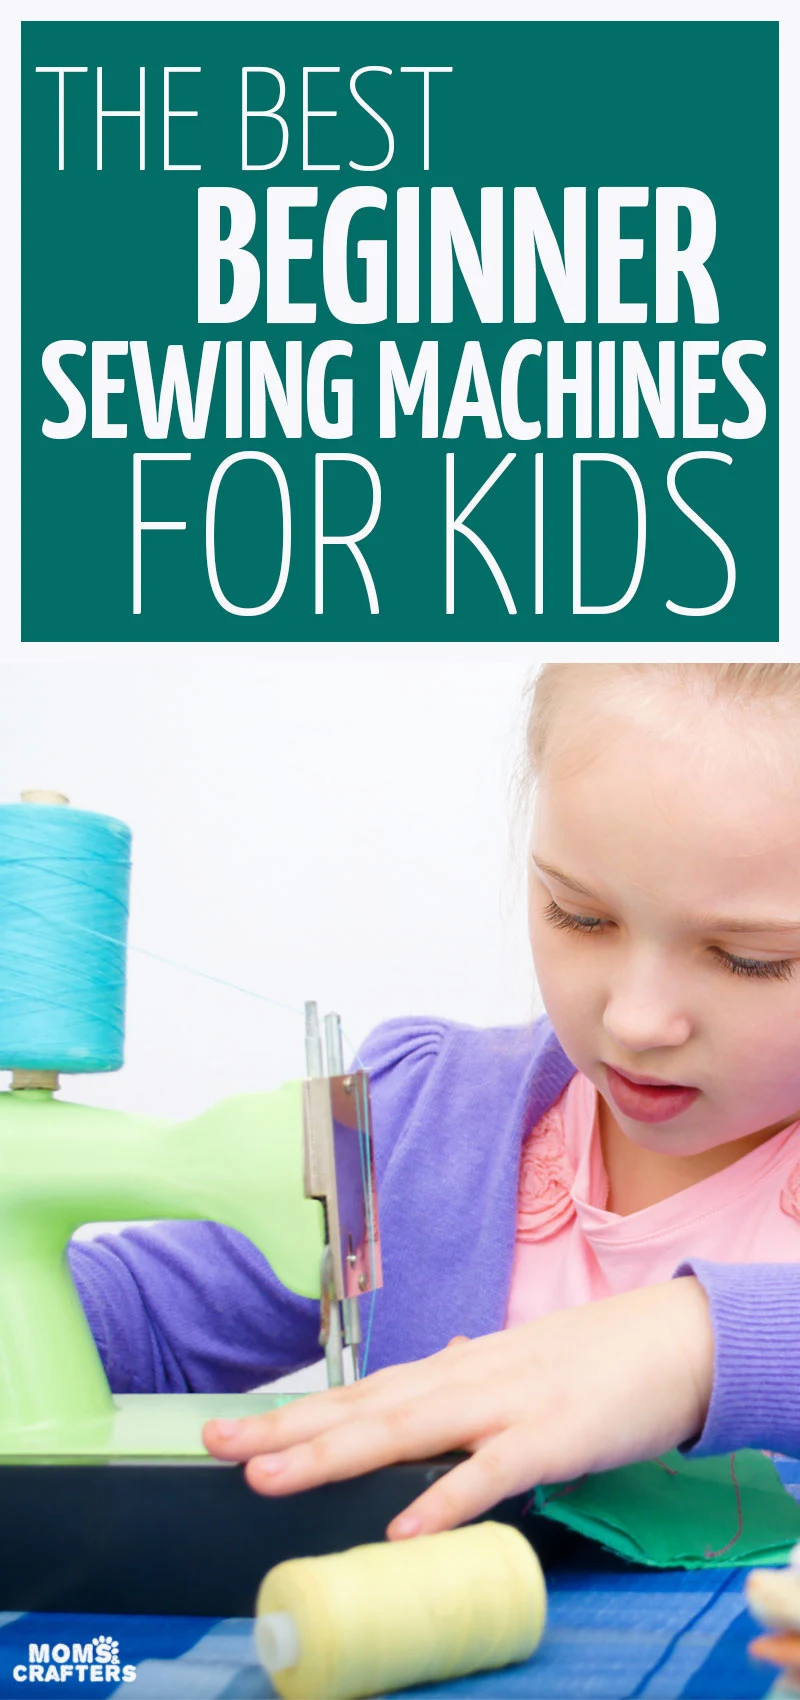 Kids can learn how to sew pretty young - find out what the best sewing machine for kids including tweens, teens, and children as young as 6! These sewing machines and tips for teaching kids how to sew are a fun new life skill for kids to learn.